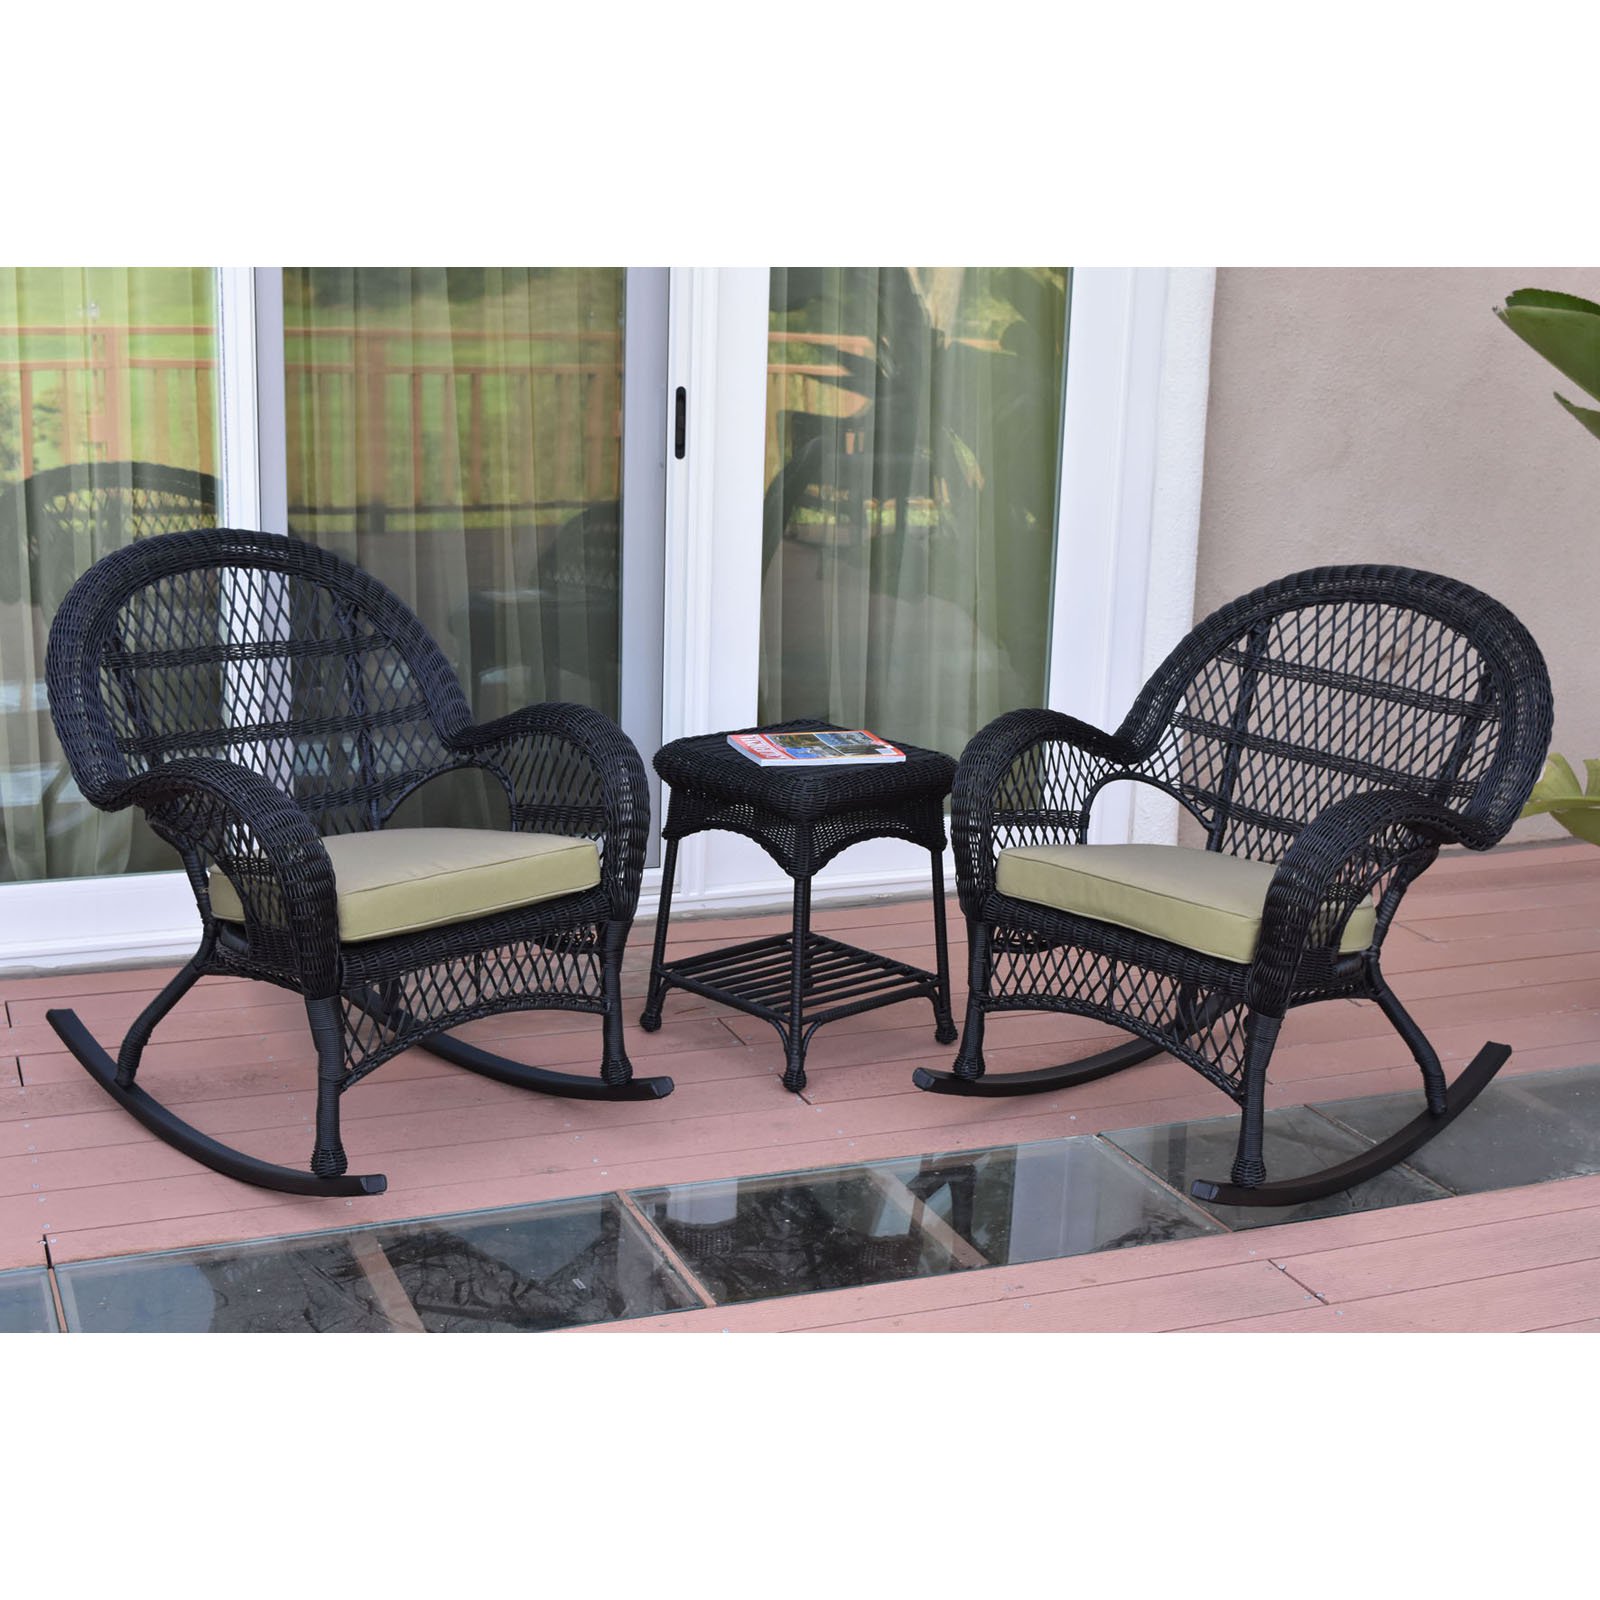 Jeco 3 Piece Wicker Conversation Set in White with Tan Cushions - image 1 of 11